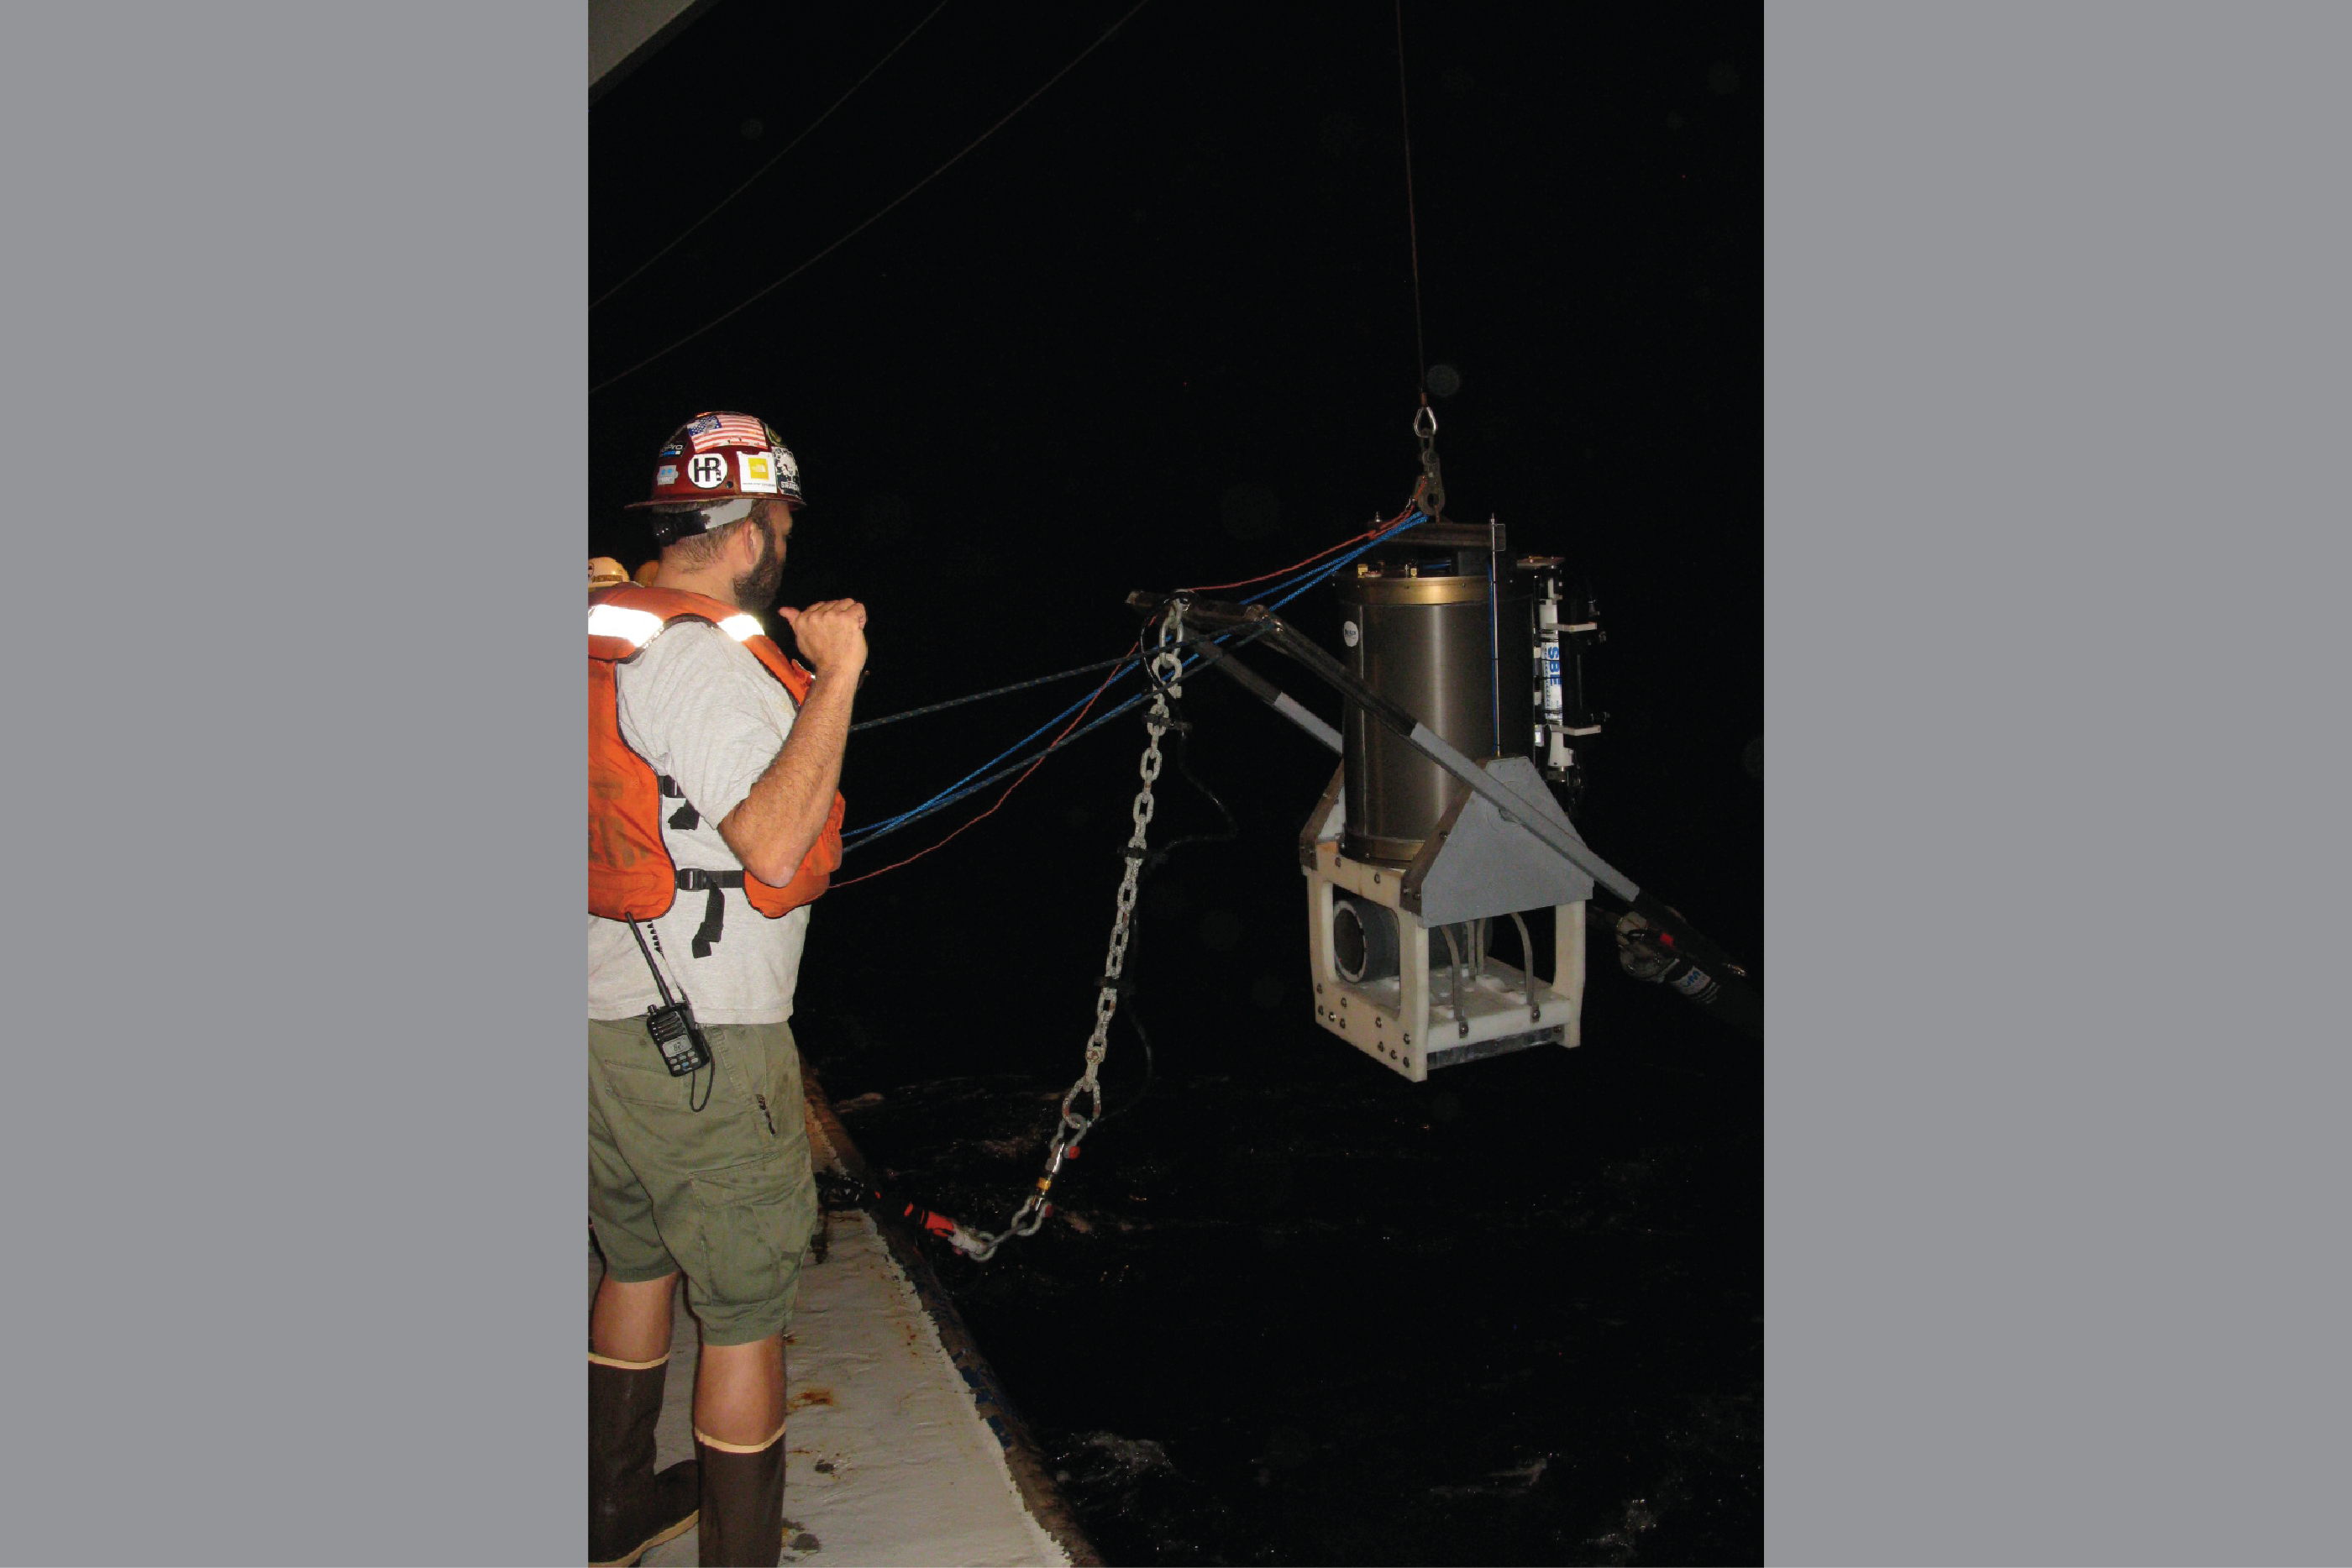 Test deployment of an <a href="https://www.mbari.org/technology/emerging-current-tools/instruments/environmental-sample-processor-esp/" target="_blank">Environmental Sample Processor</a> (ESP) on the Del Mar mooring, 2015